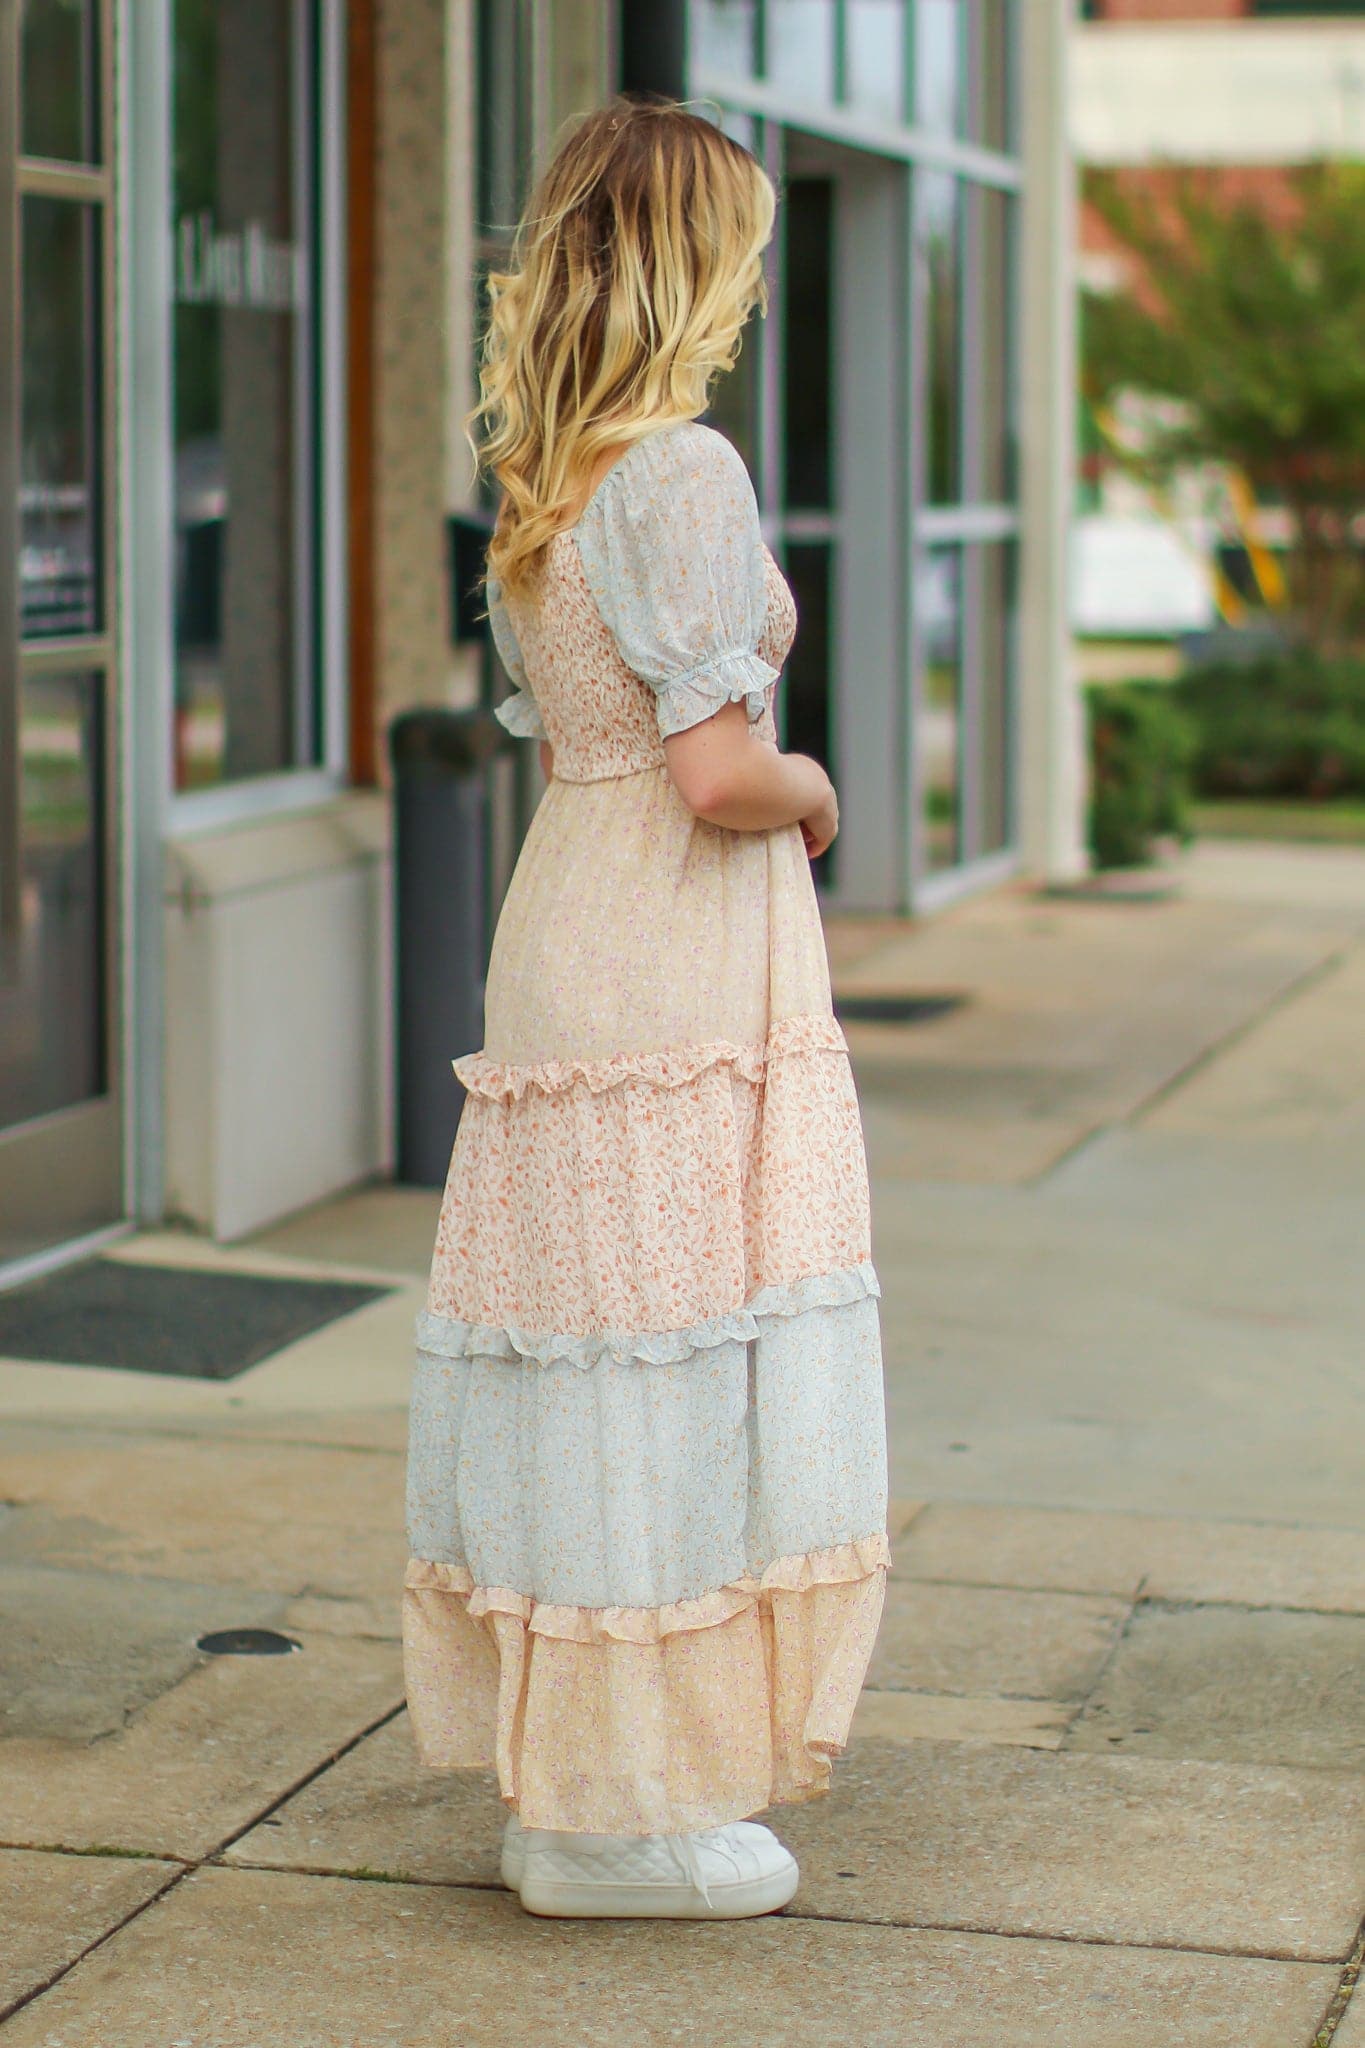  Feels Like Fate Floral Tiered Dress - FINAL SALE - Madison and Mallory